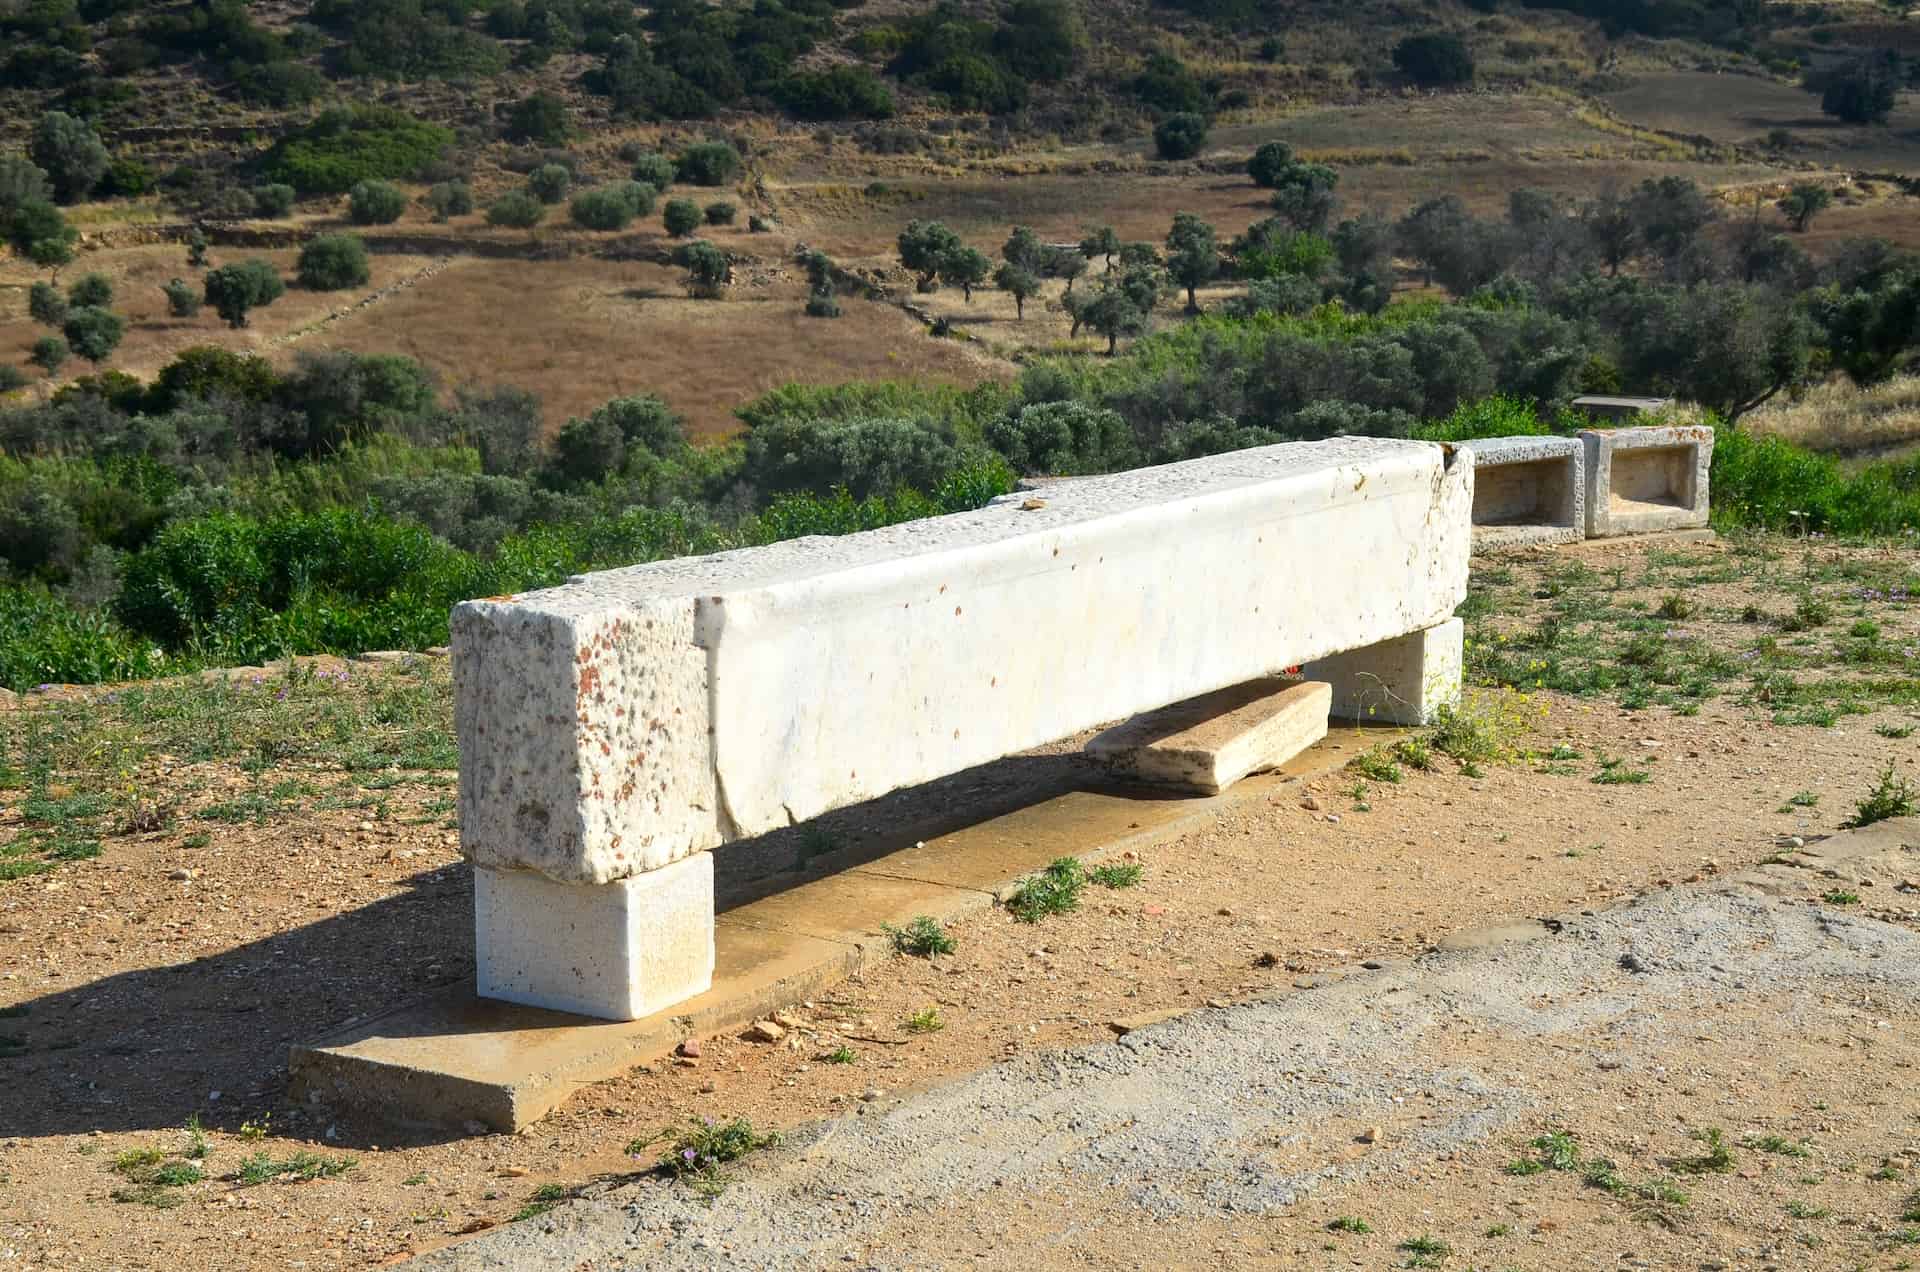 Beam from the pronaos (porch) of the Temple of Demeter in Naxos, Greece